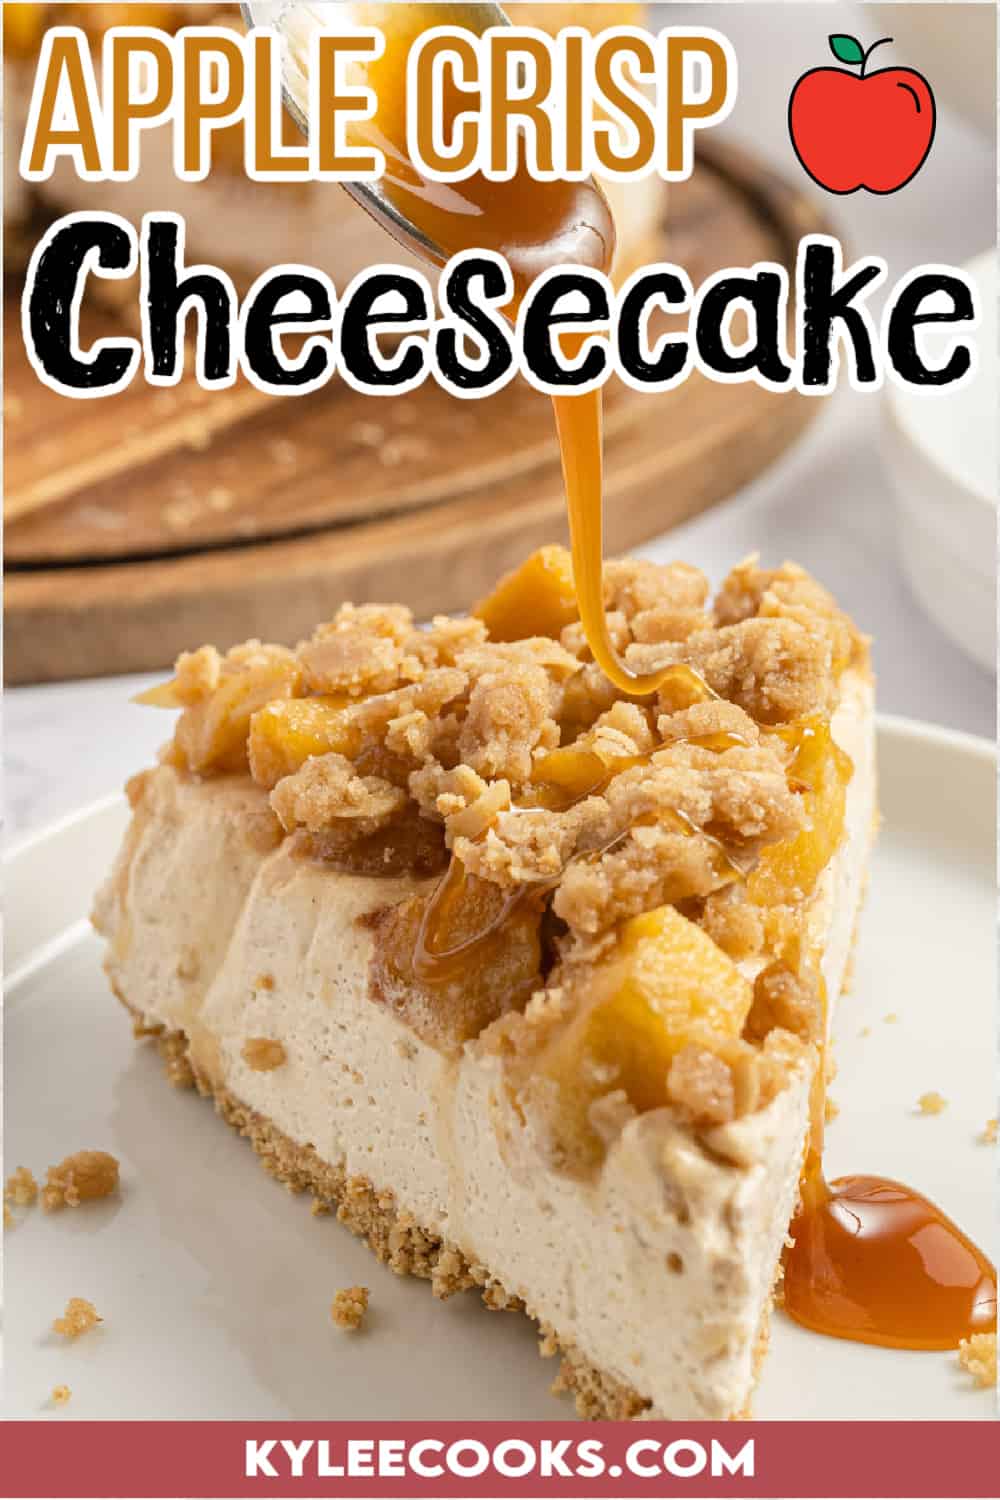 slice of apple crisp cheesecake with recipe name and ingredients overlaid in text.